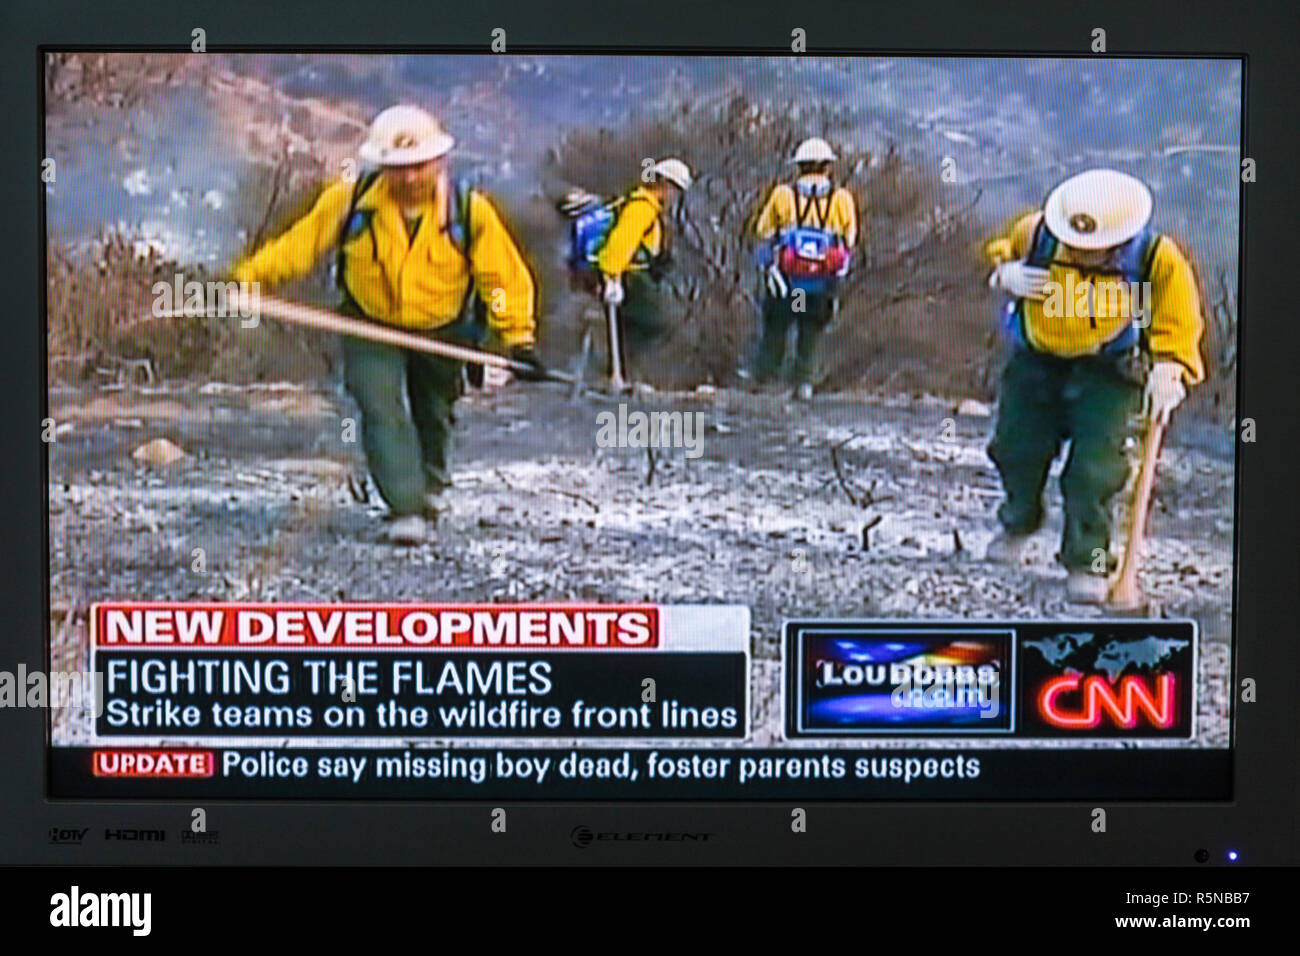 Miami Beach Florida,flat panel TV,television,set,screen shot,media,news,newscast,broadcast,cable,CNN,wildfires,firefighters,disaster,updates,FL0909120 Stock Photo